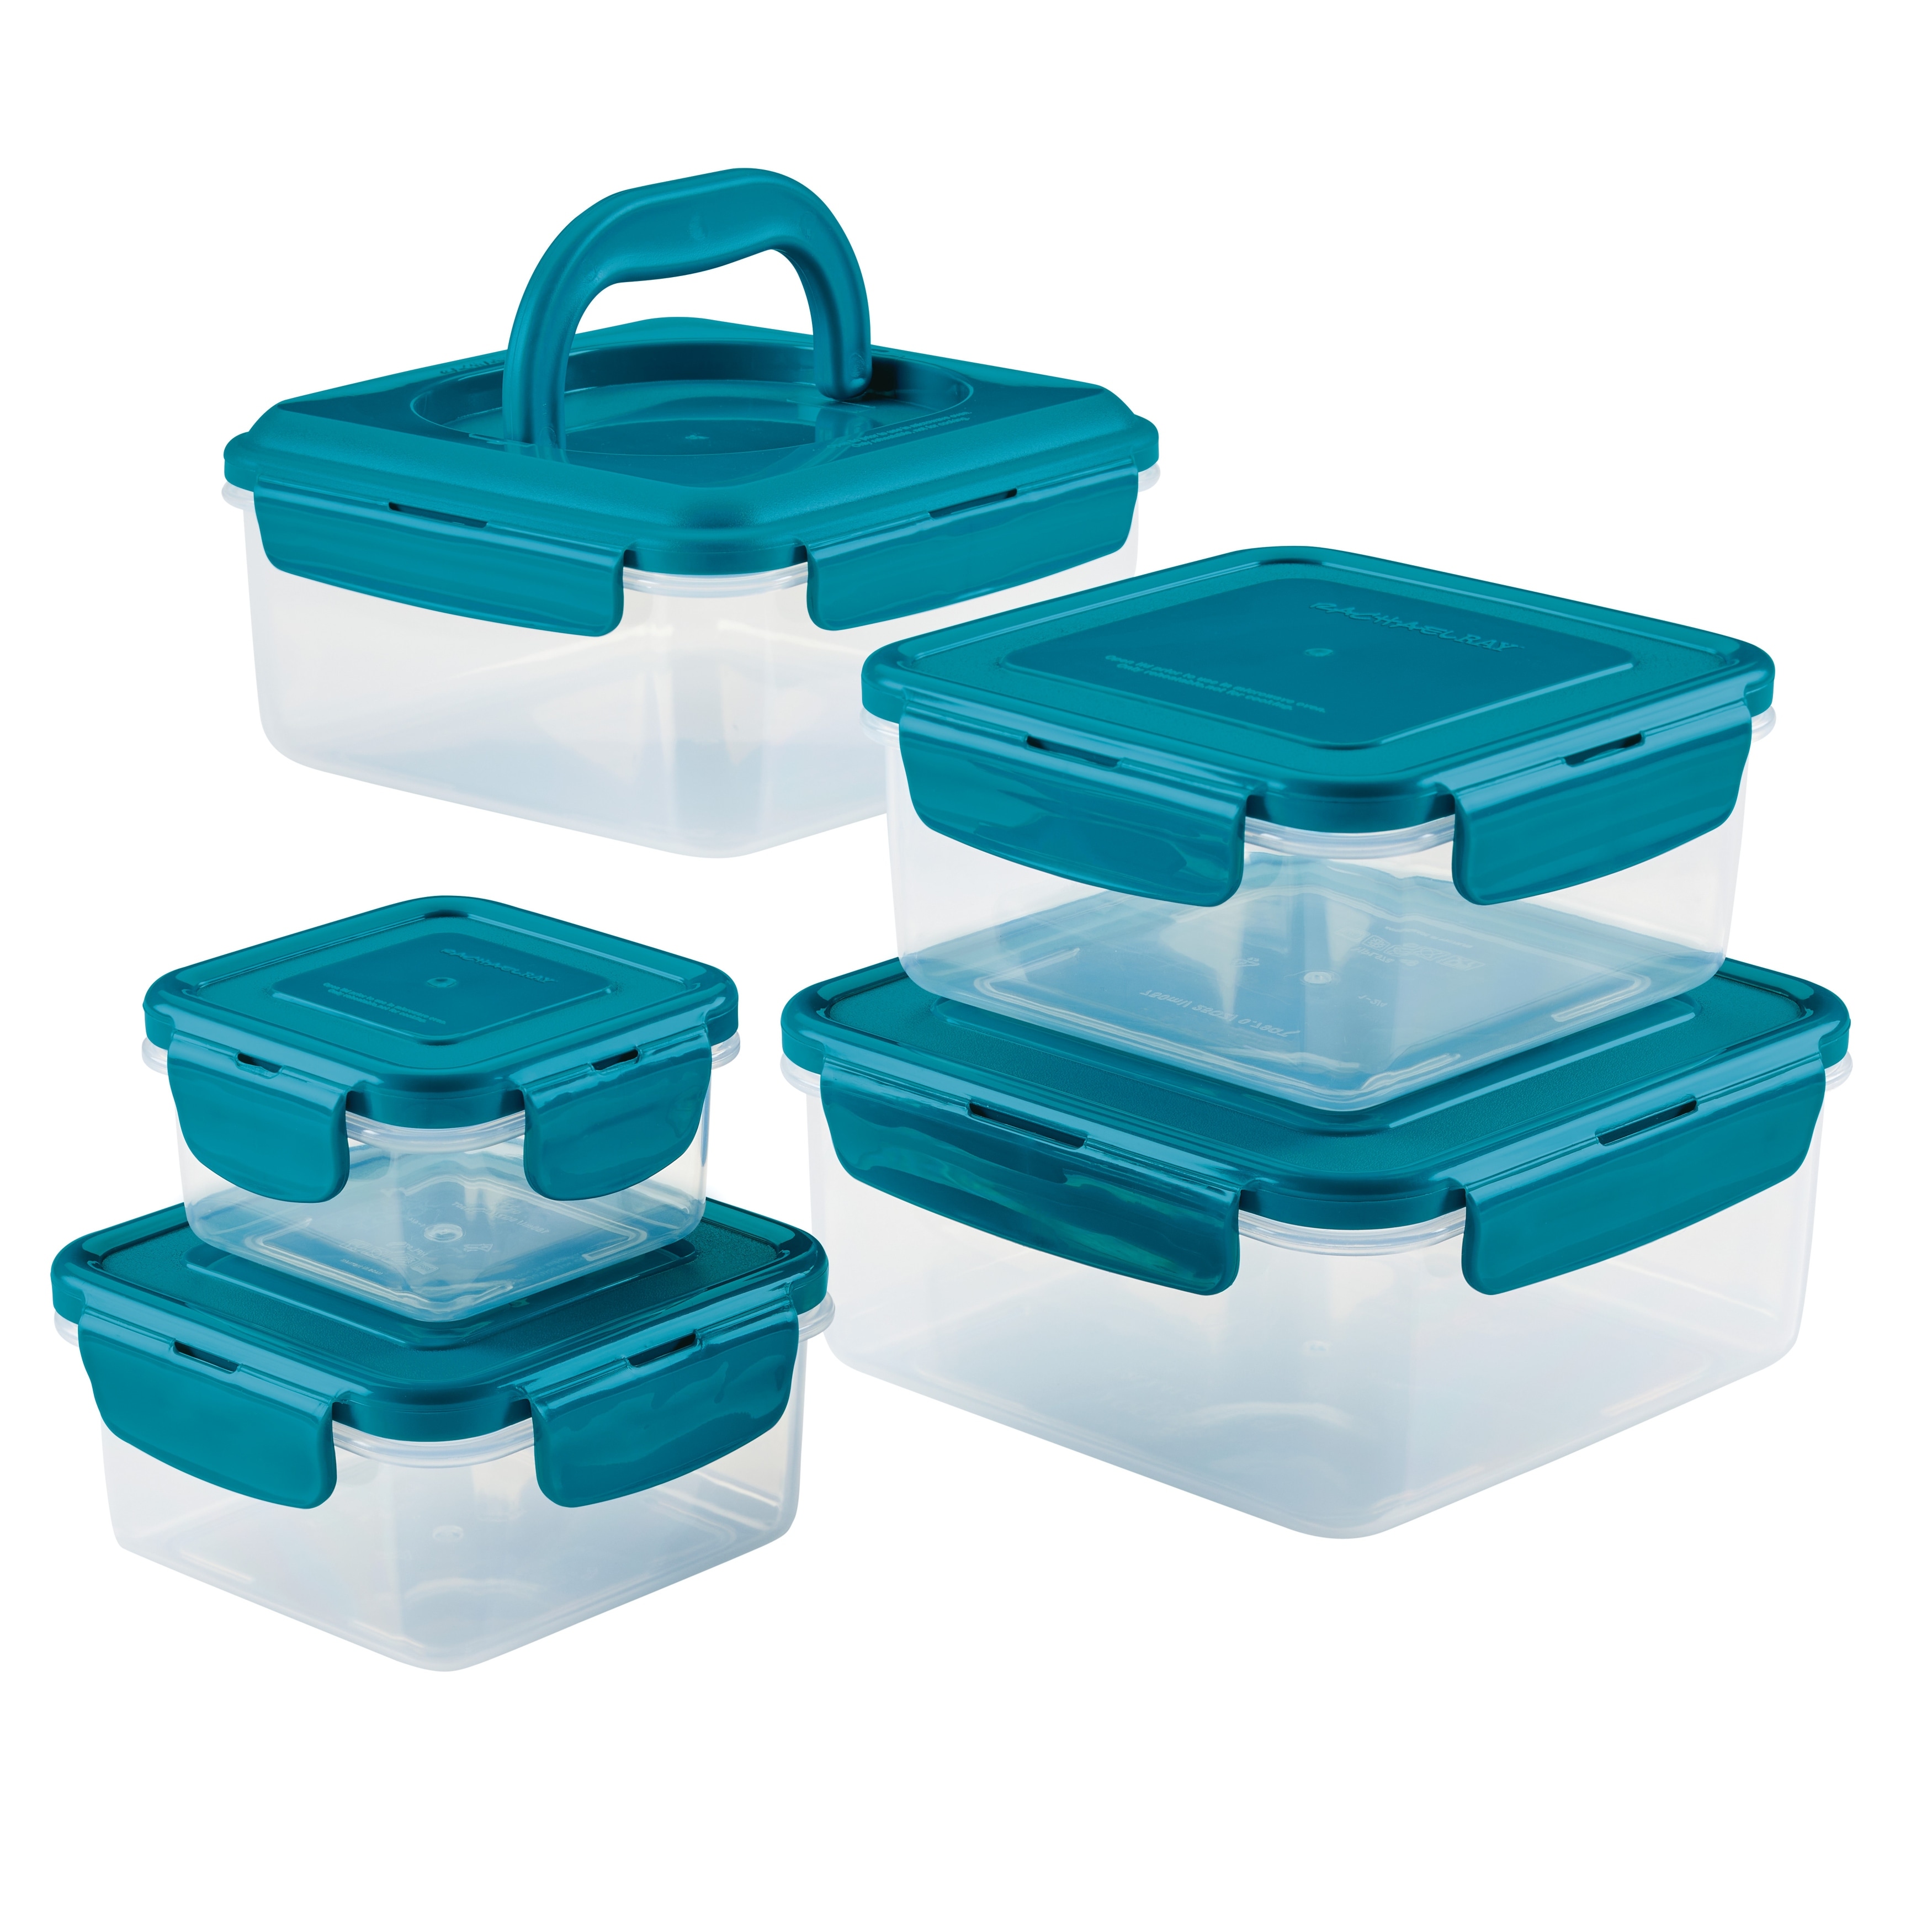 https://ak1.ostkcdn.com/images/products/is/images/direct/370500e60bd7049eeafd8be096b7b9e53b929373/Rachael-Ray-Leak-Proof-Nestable-Square-Food-Storage-Set%2C-10pc.jpg